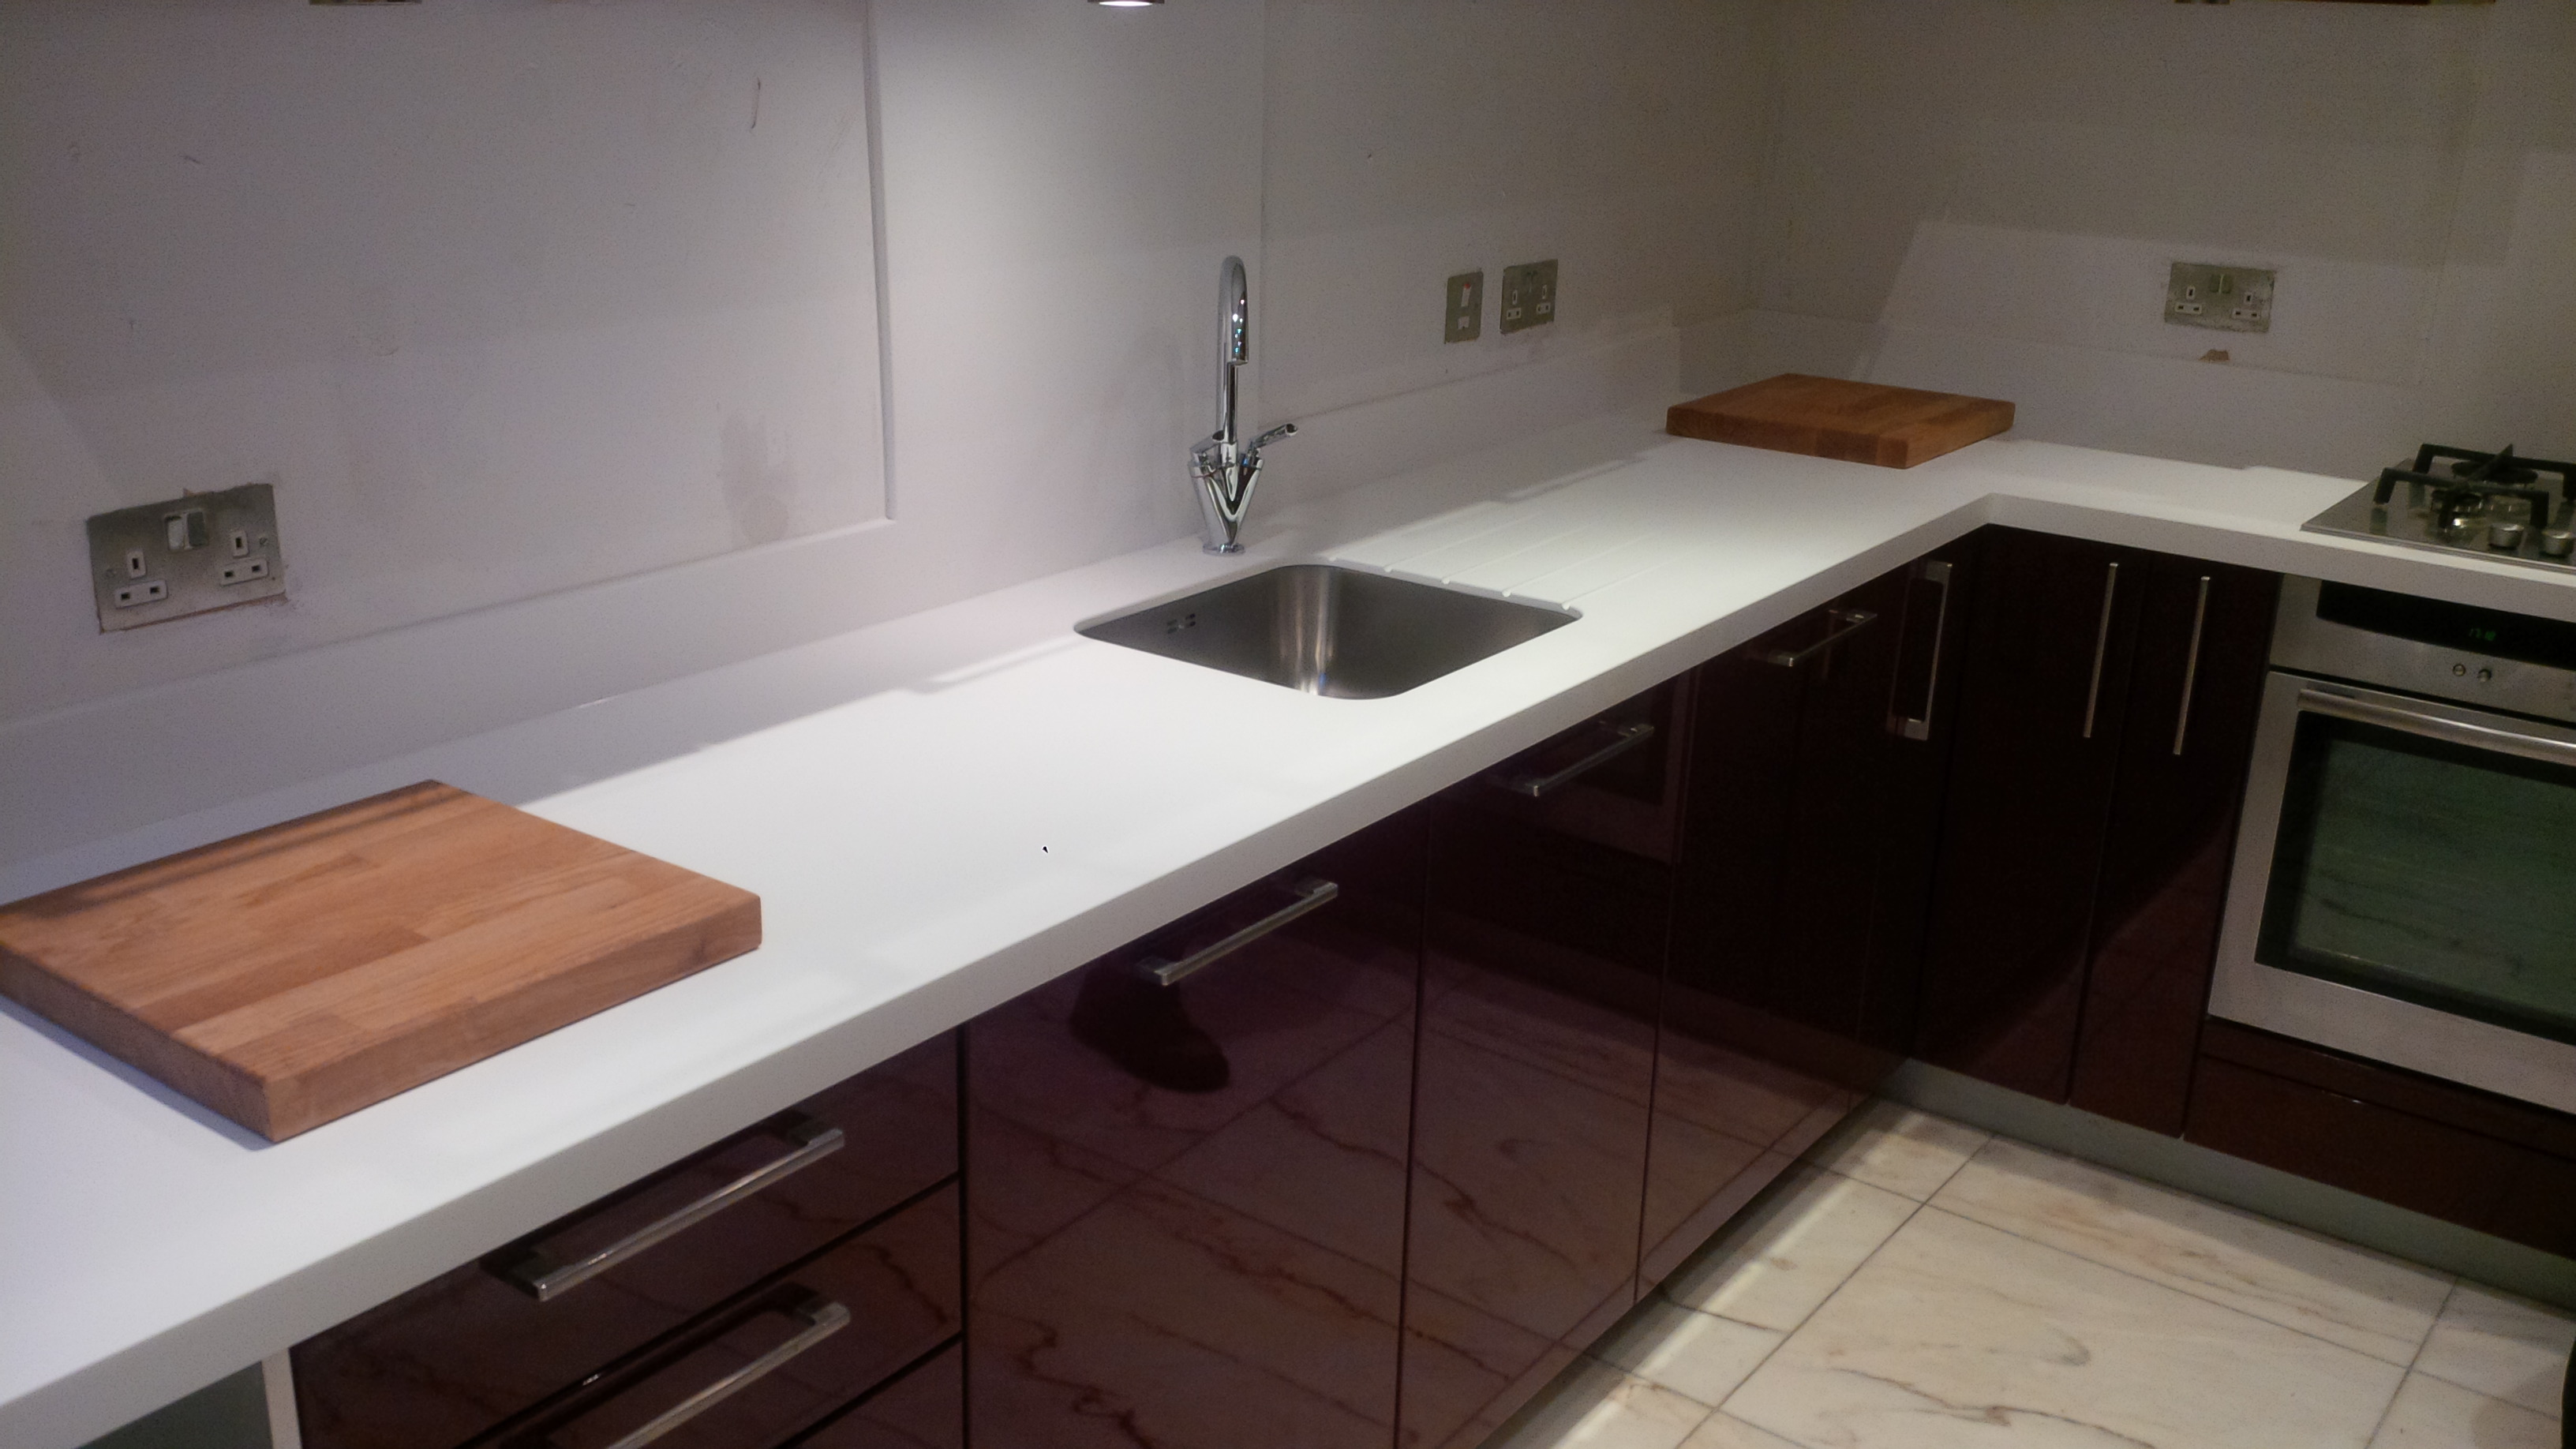 Replacement of granite worktops and upstands to glacier white corian and fitting of stainless steel  sink